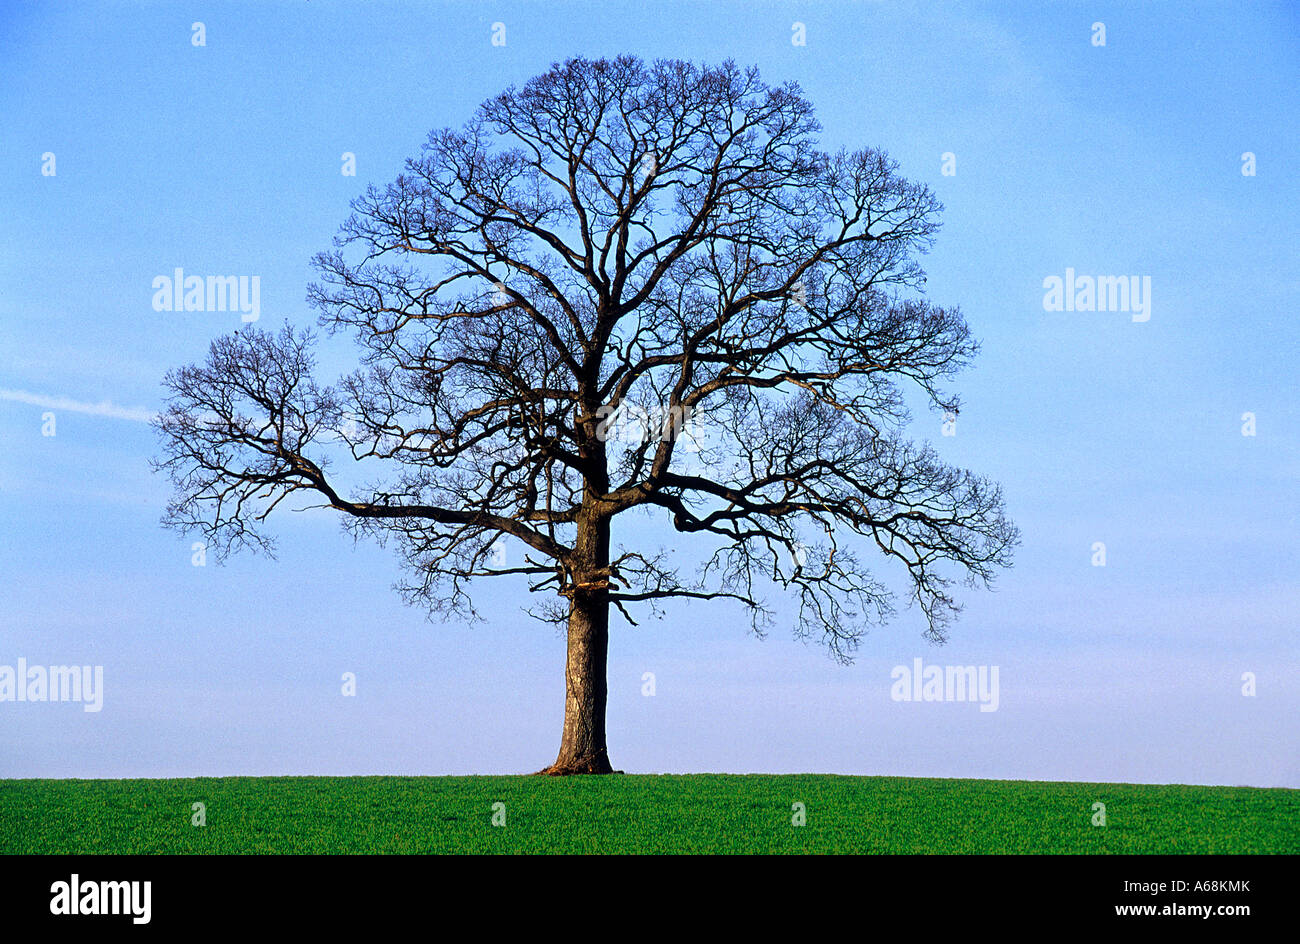 Solitary tree without leaves Stock Photo